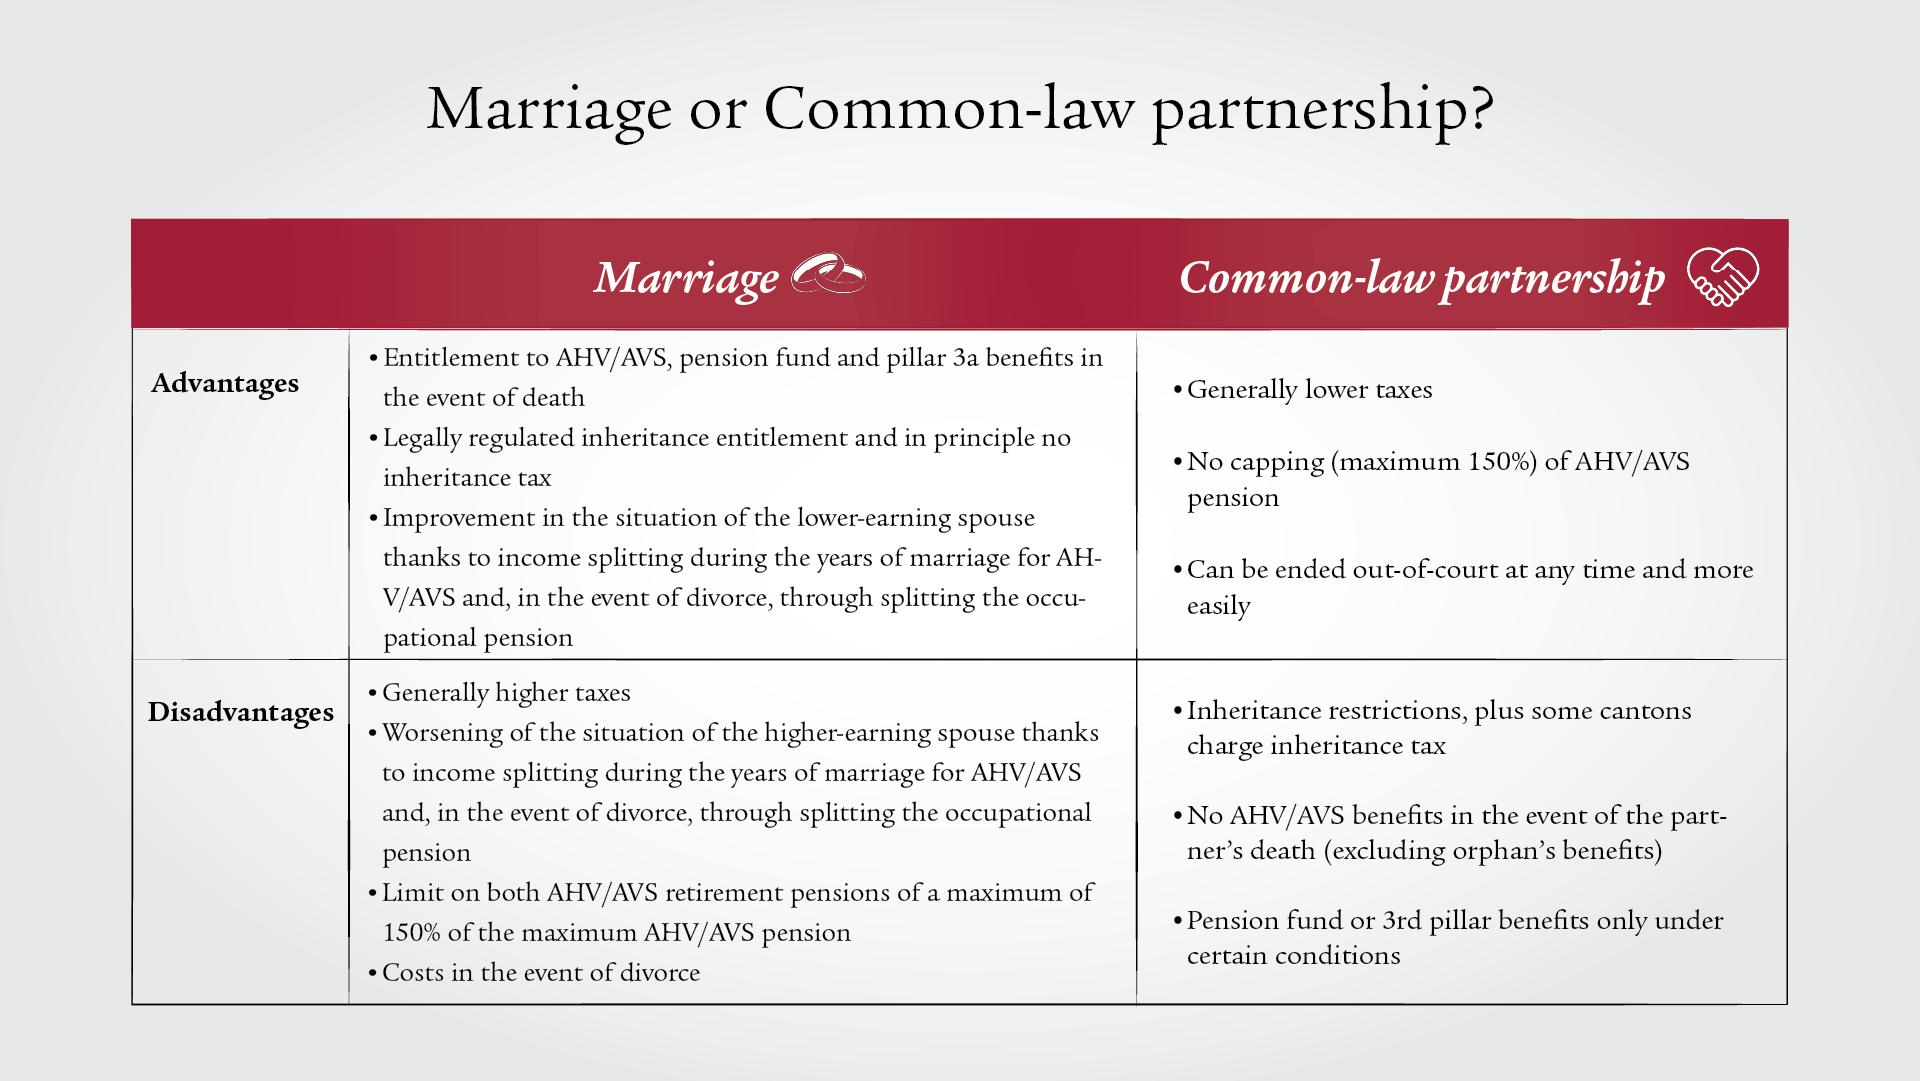 Table showing the advantages and disadvantages of marriage and common-law partnerships